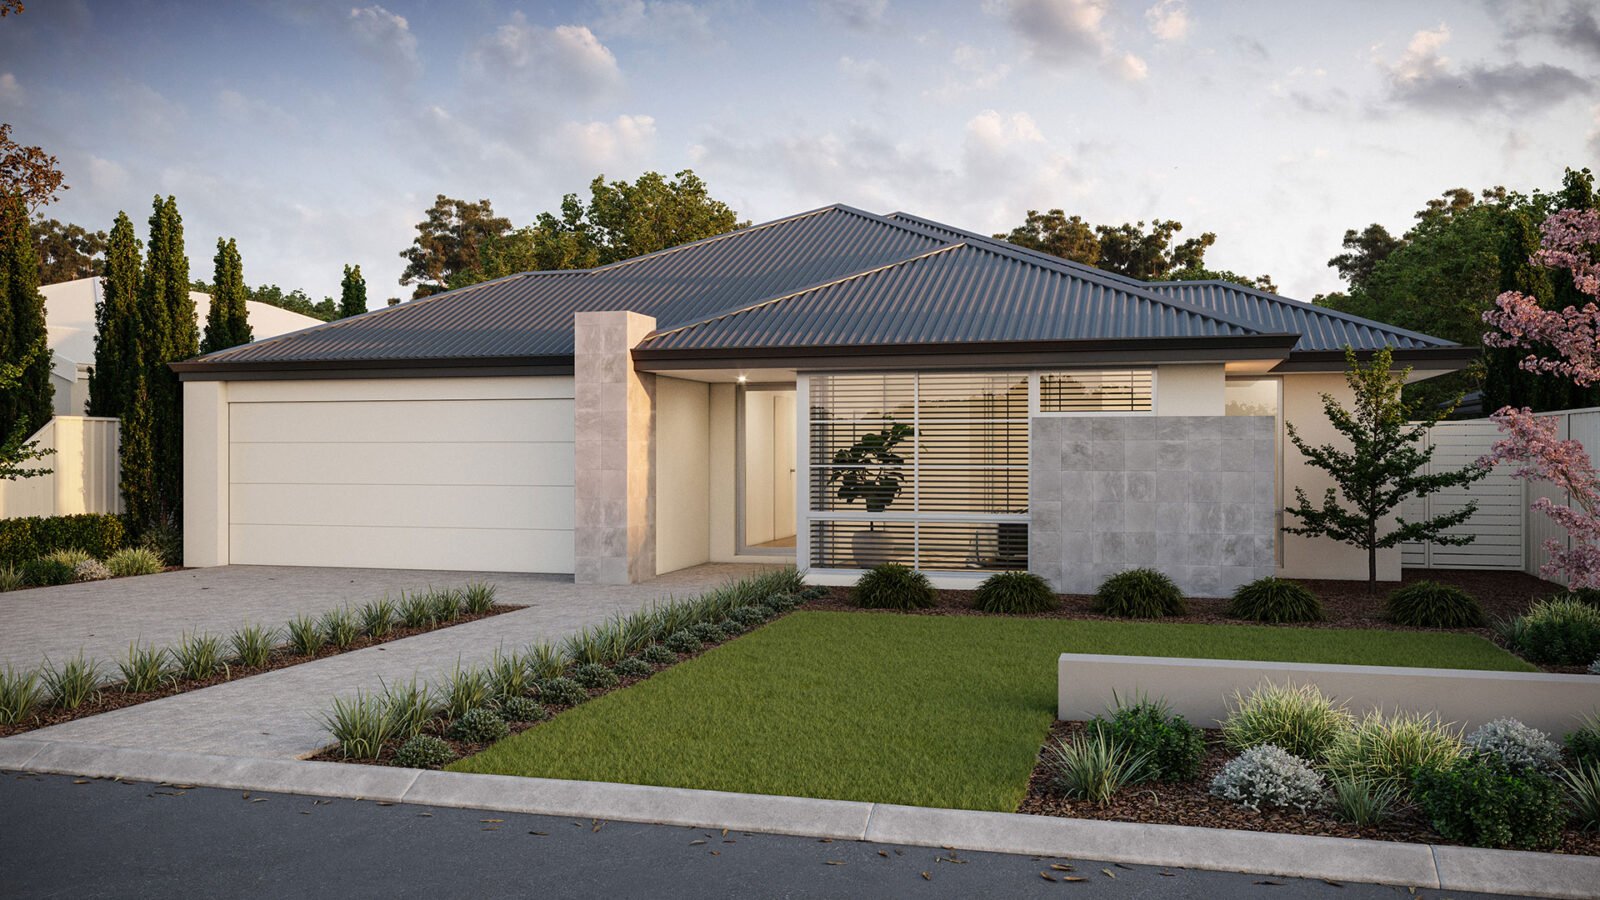 Plunkett Homes - Cassia | Lifestyle - Gallery - Home Designs Plunkett Homes Lifestyle Mid Frontage Contemporary 